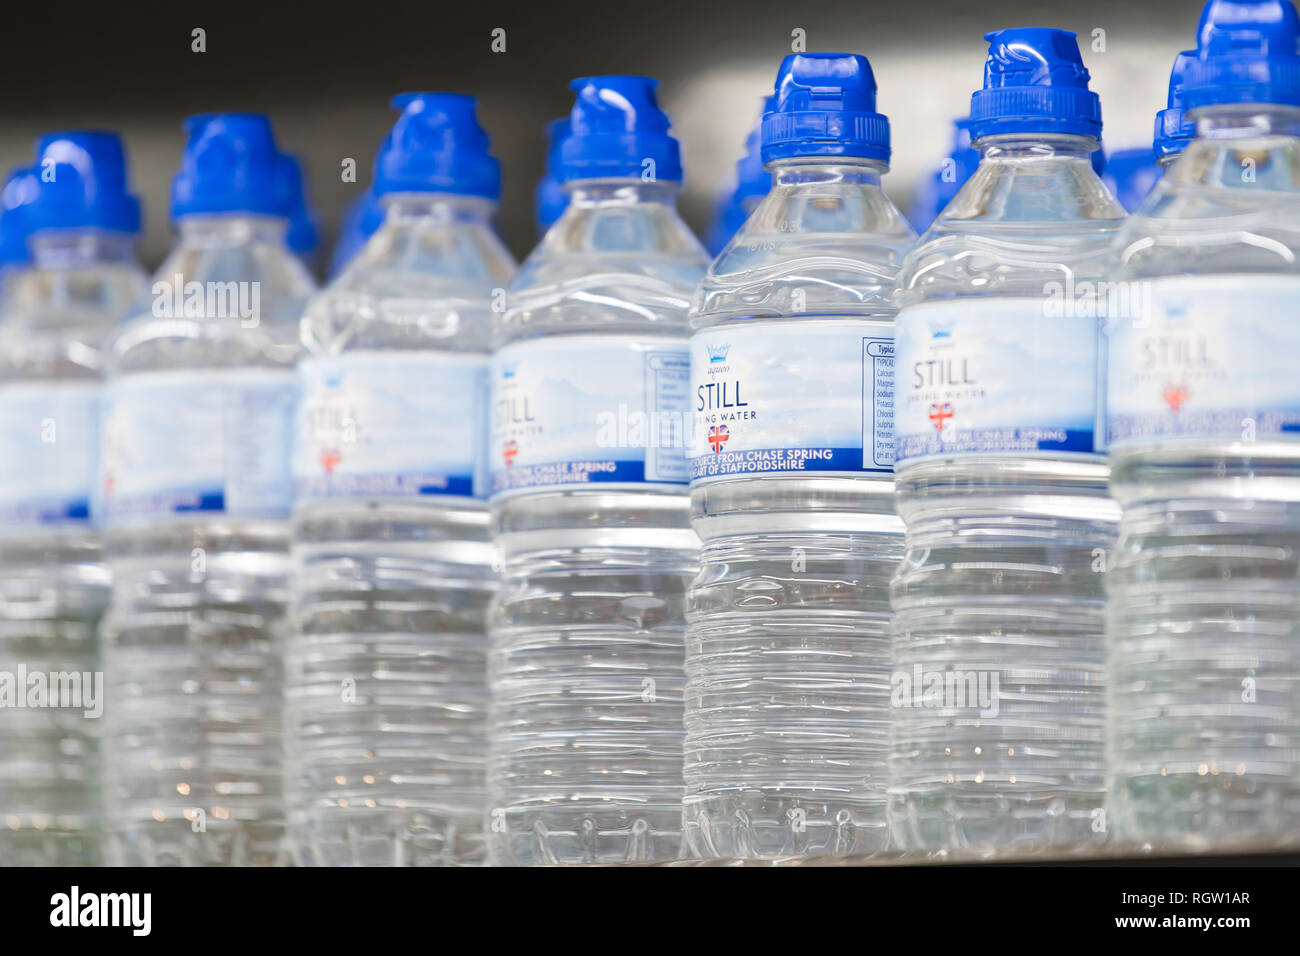 Bottles of still spring water on sale in a supermarket in the UK. Stock Photo